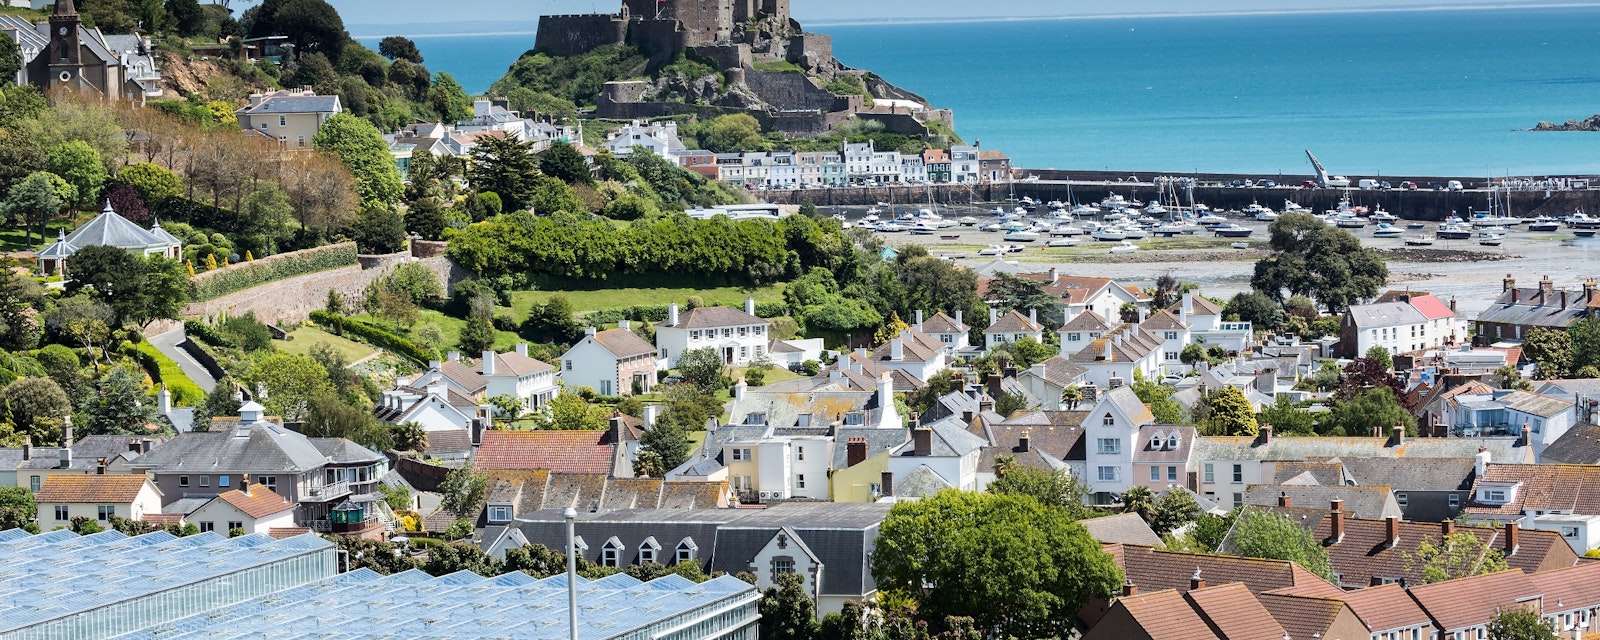 View,To,Mont,Orgueil,Castle,With,Harbour,In,Gorey,,Jersey,